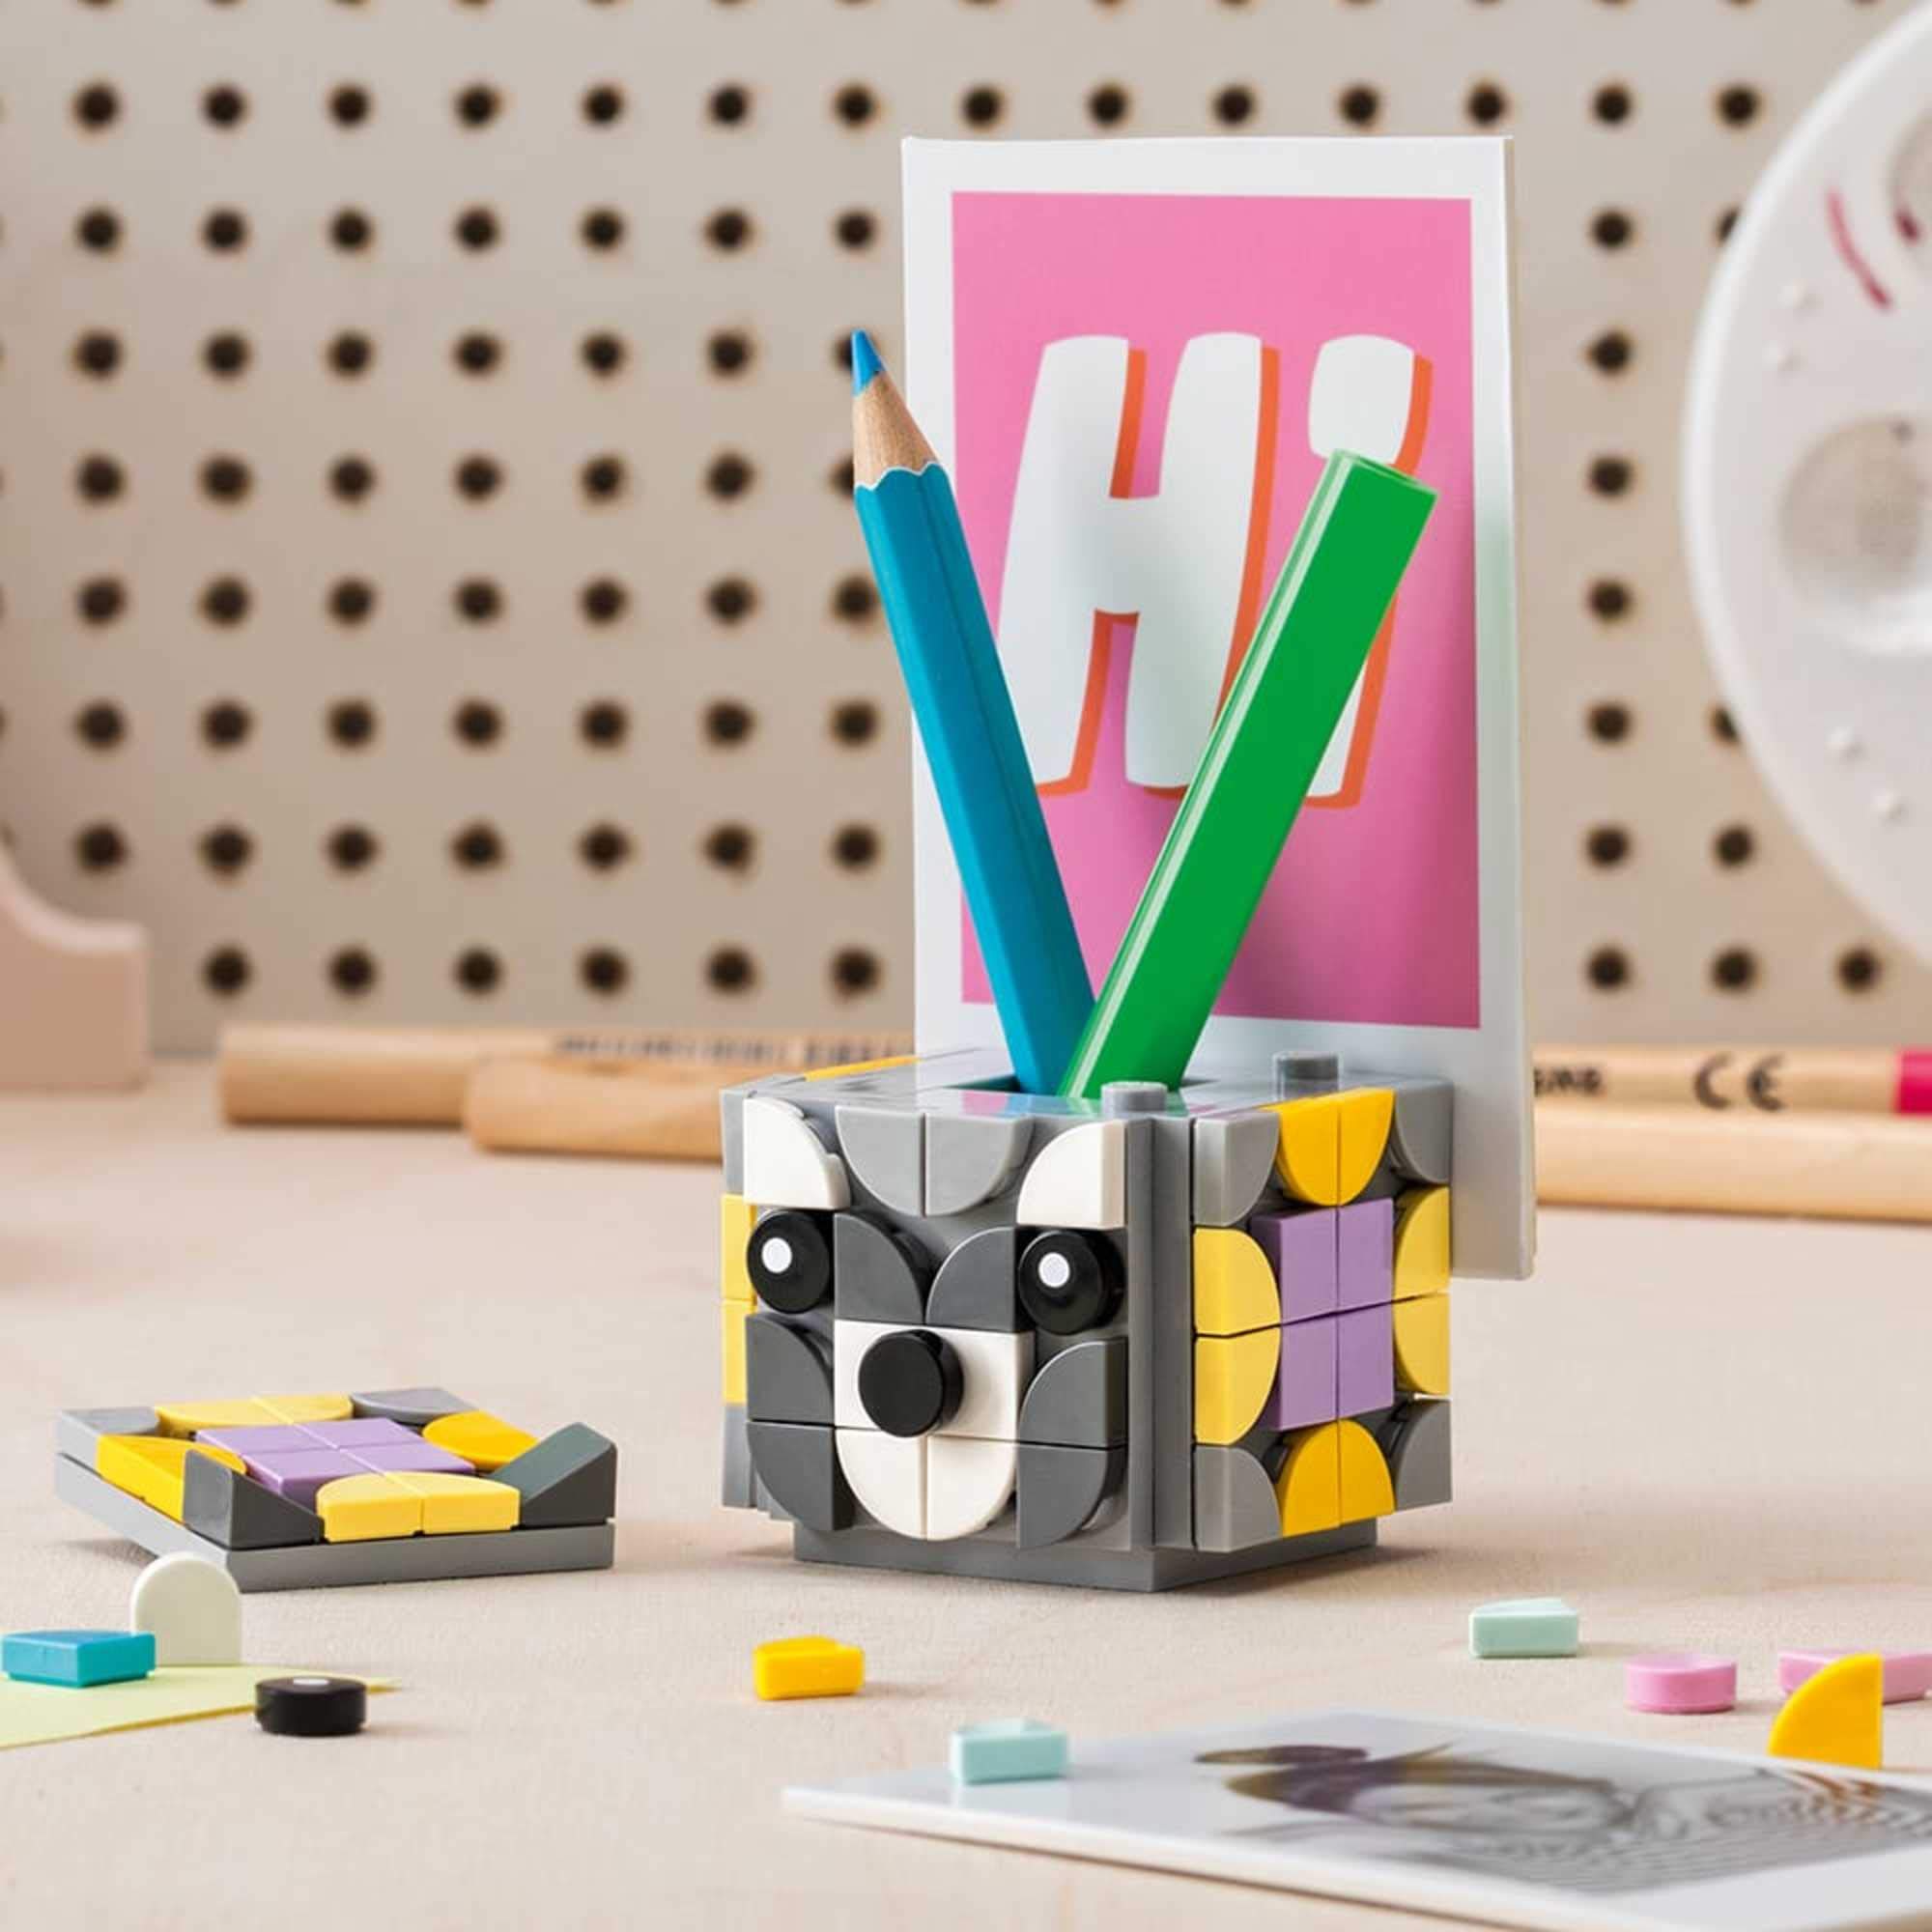 LEGO DOTS Animal Picture Holders 41904 DIY Craft; A Fun Project for Kids who Like Making Creative Room Decor, That Also Makes a Cool Holiday or Birthday Gift (423 Pieces)